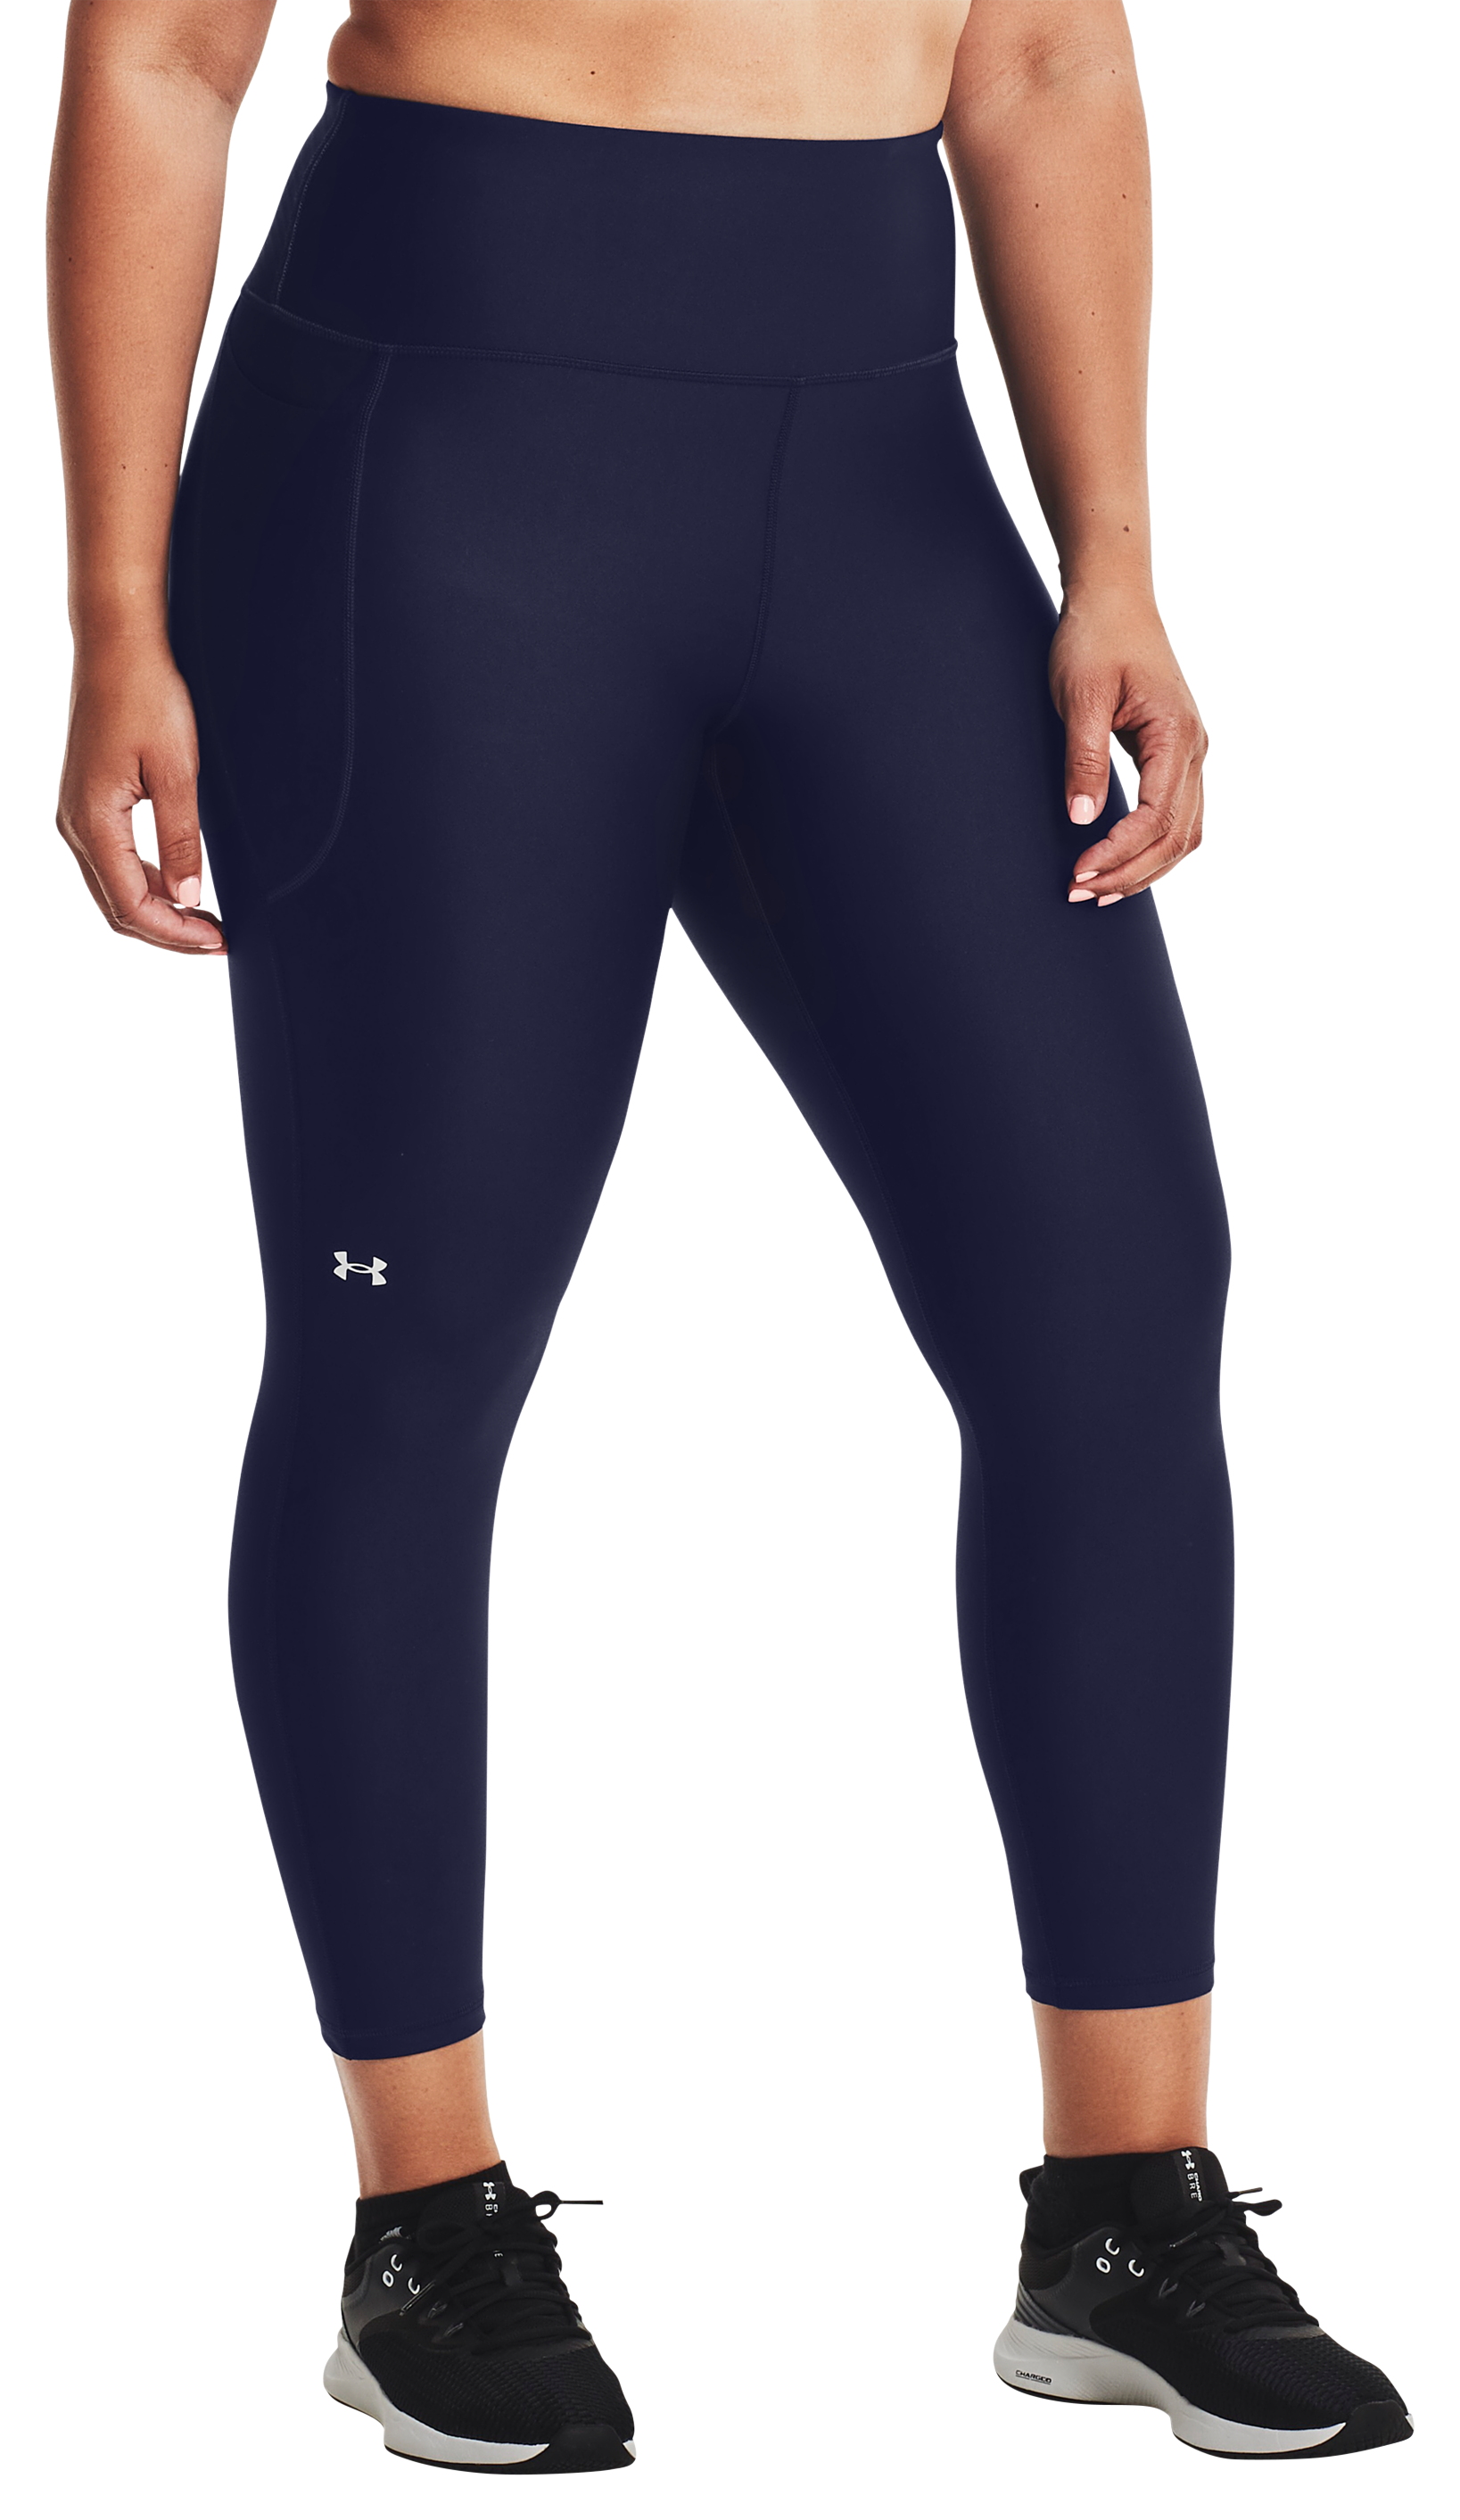 Under Armour HeatGear Armour No-Slip Waistband Ankle Leggings for Ladies - Midnight Navy/White - L - Short